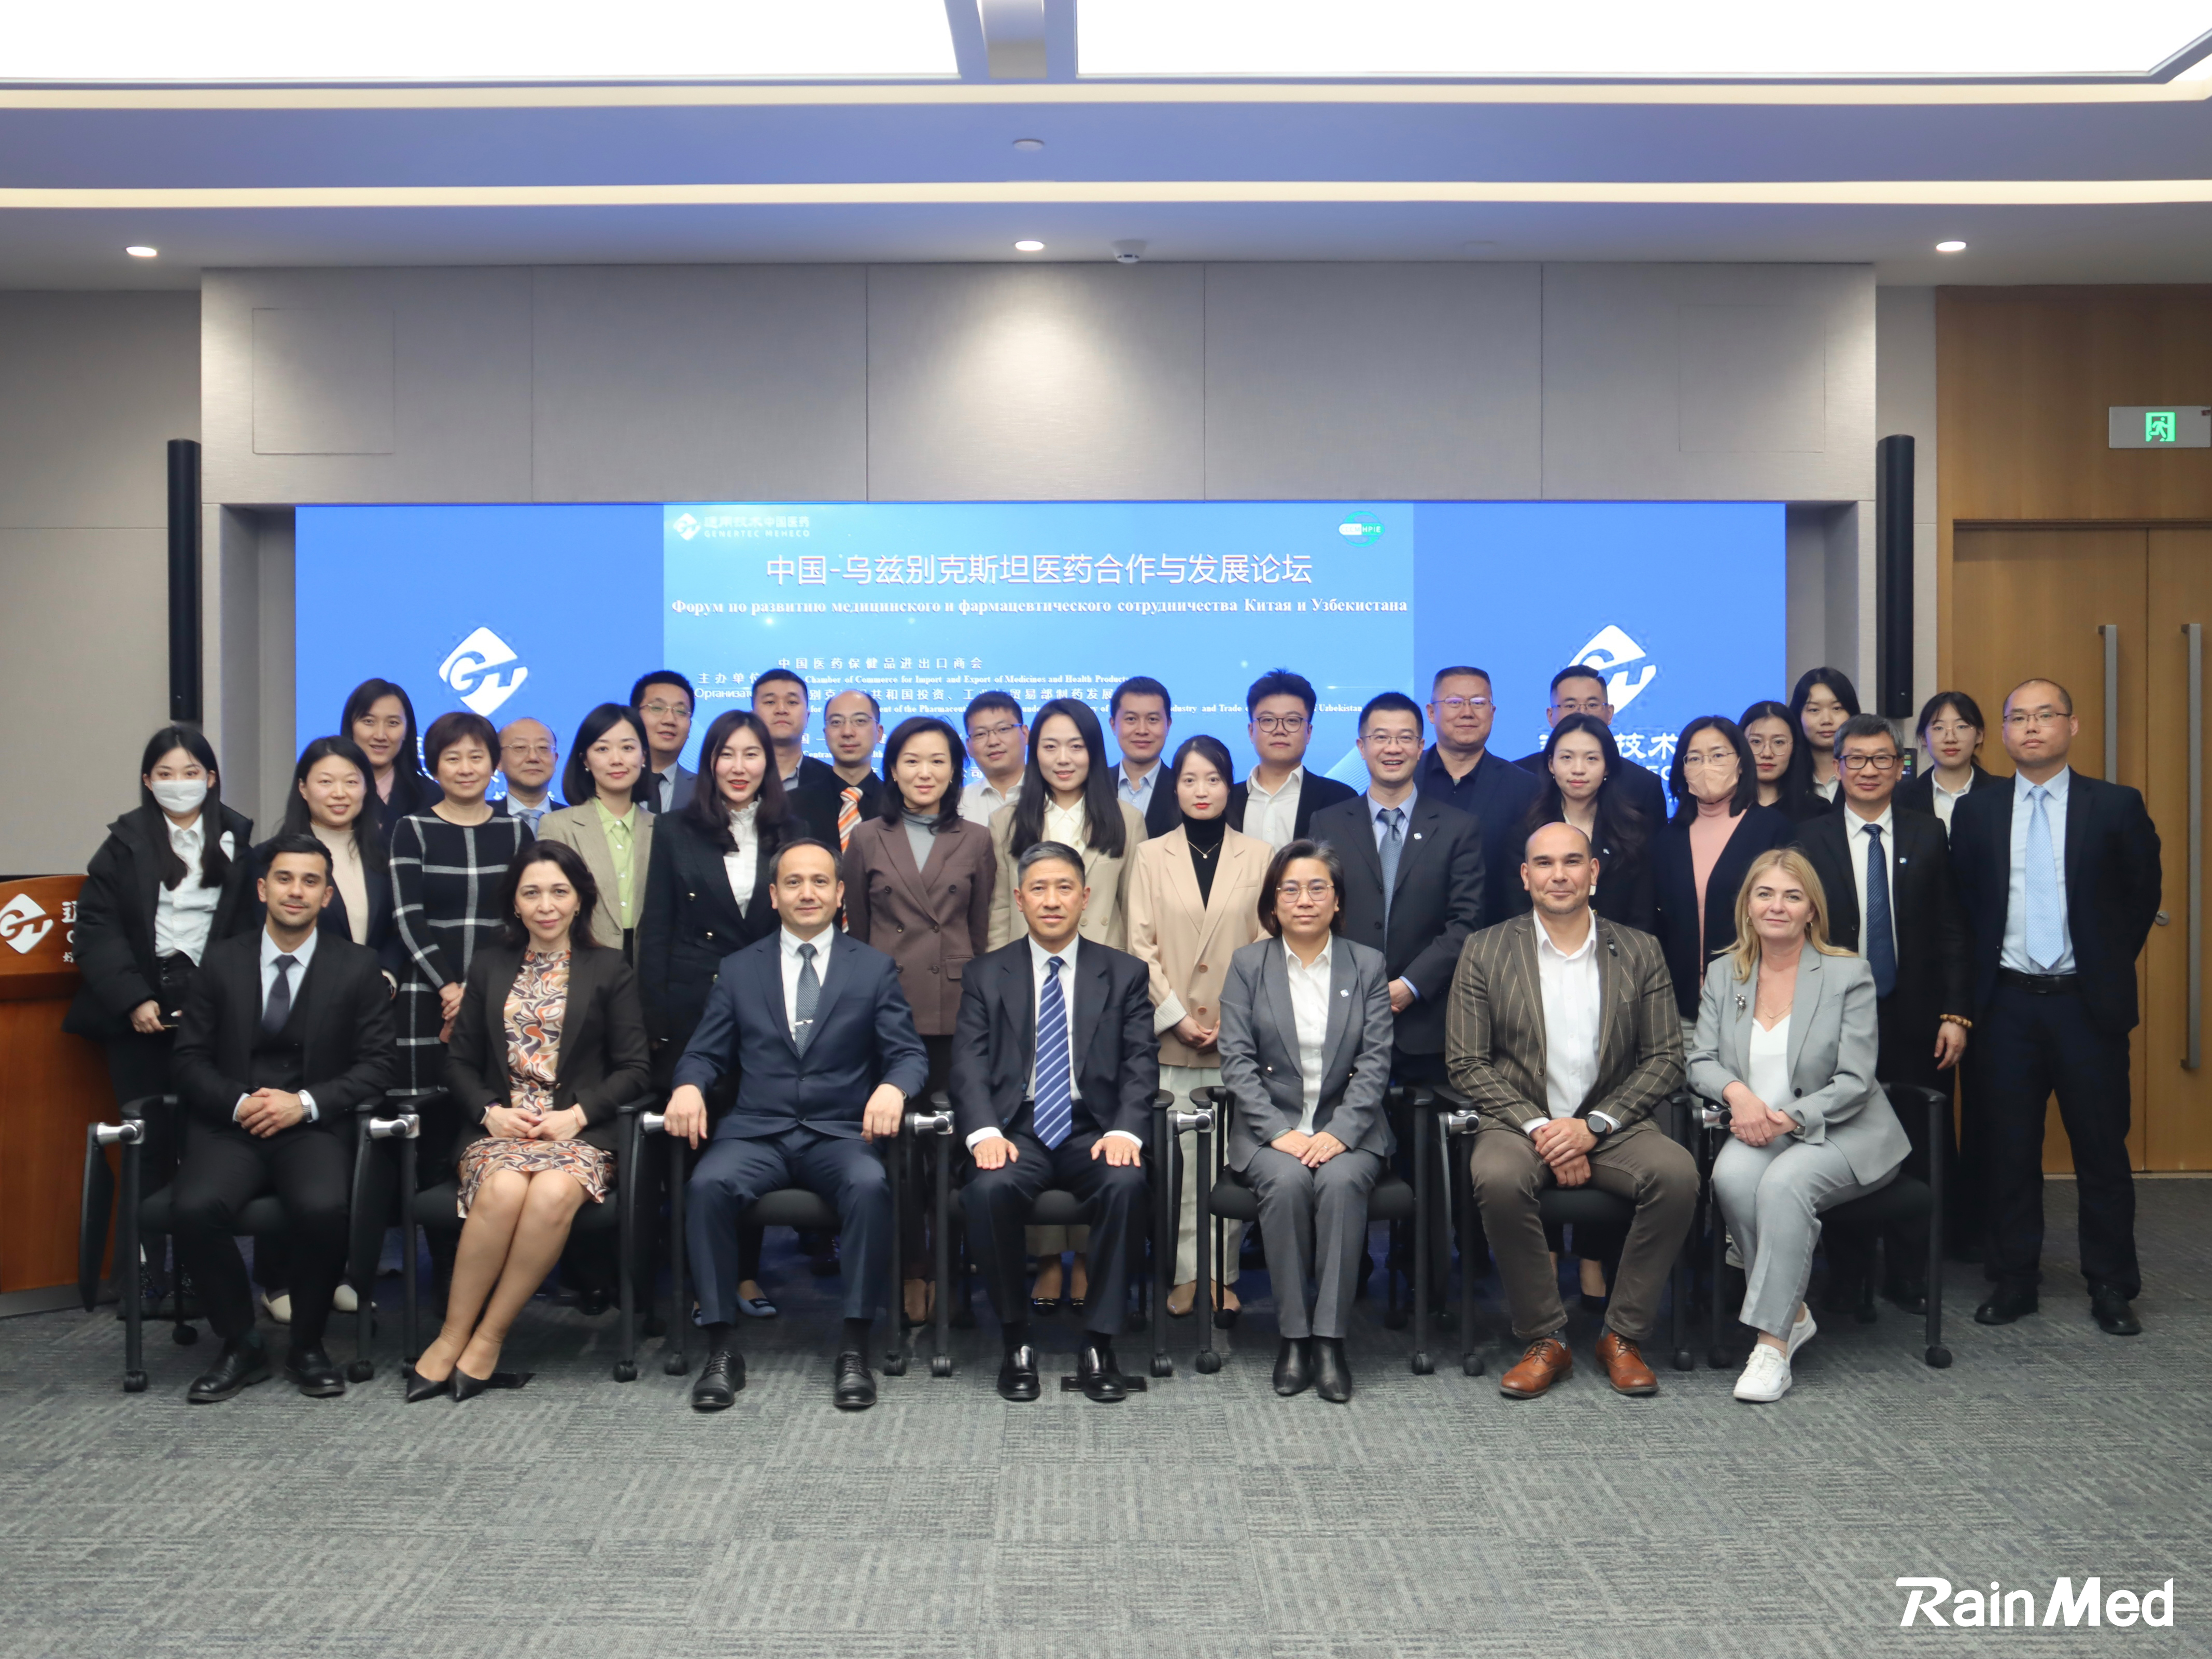 RainMed Medical was Invited to Attend China-Uzbekistan Medical Cooperation and Development Forum to Promote Health Collaboration Between Medical Enterprises of the Two Countries